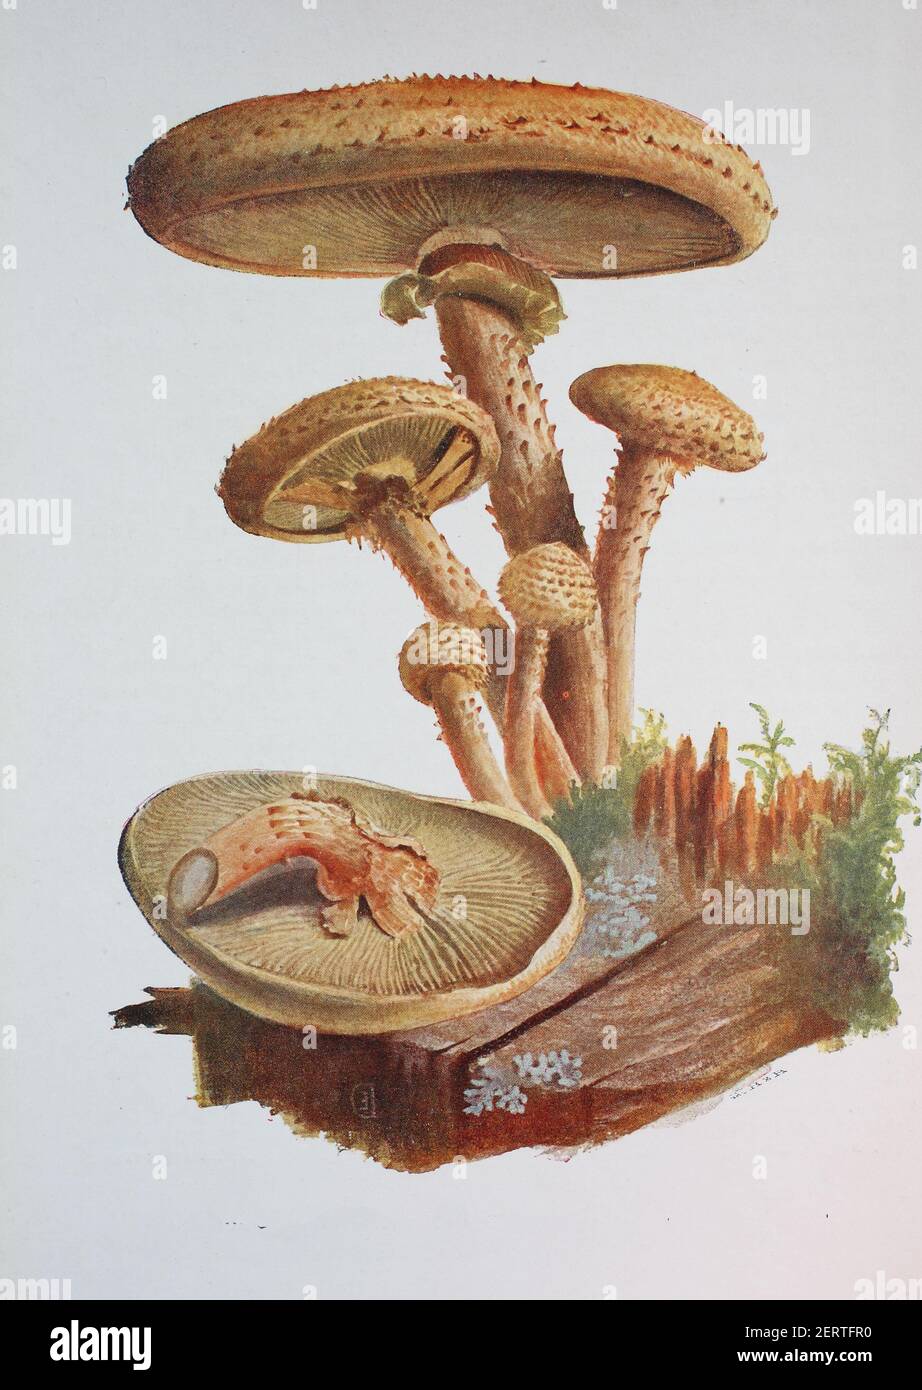 Pholiota squarrosa, commonly known as the shaggy scalycap, the shaggy Pholiota, or the scaly Pholiota, digital reproduction of an ilustration of Emil Doerstling (1859-1940) Stock Photo